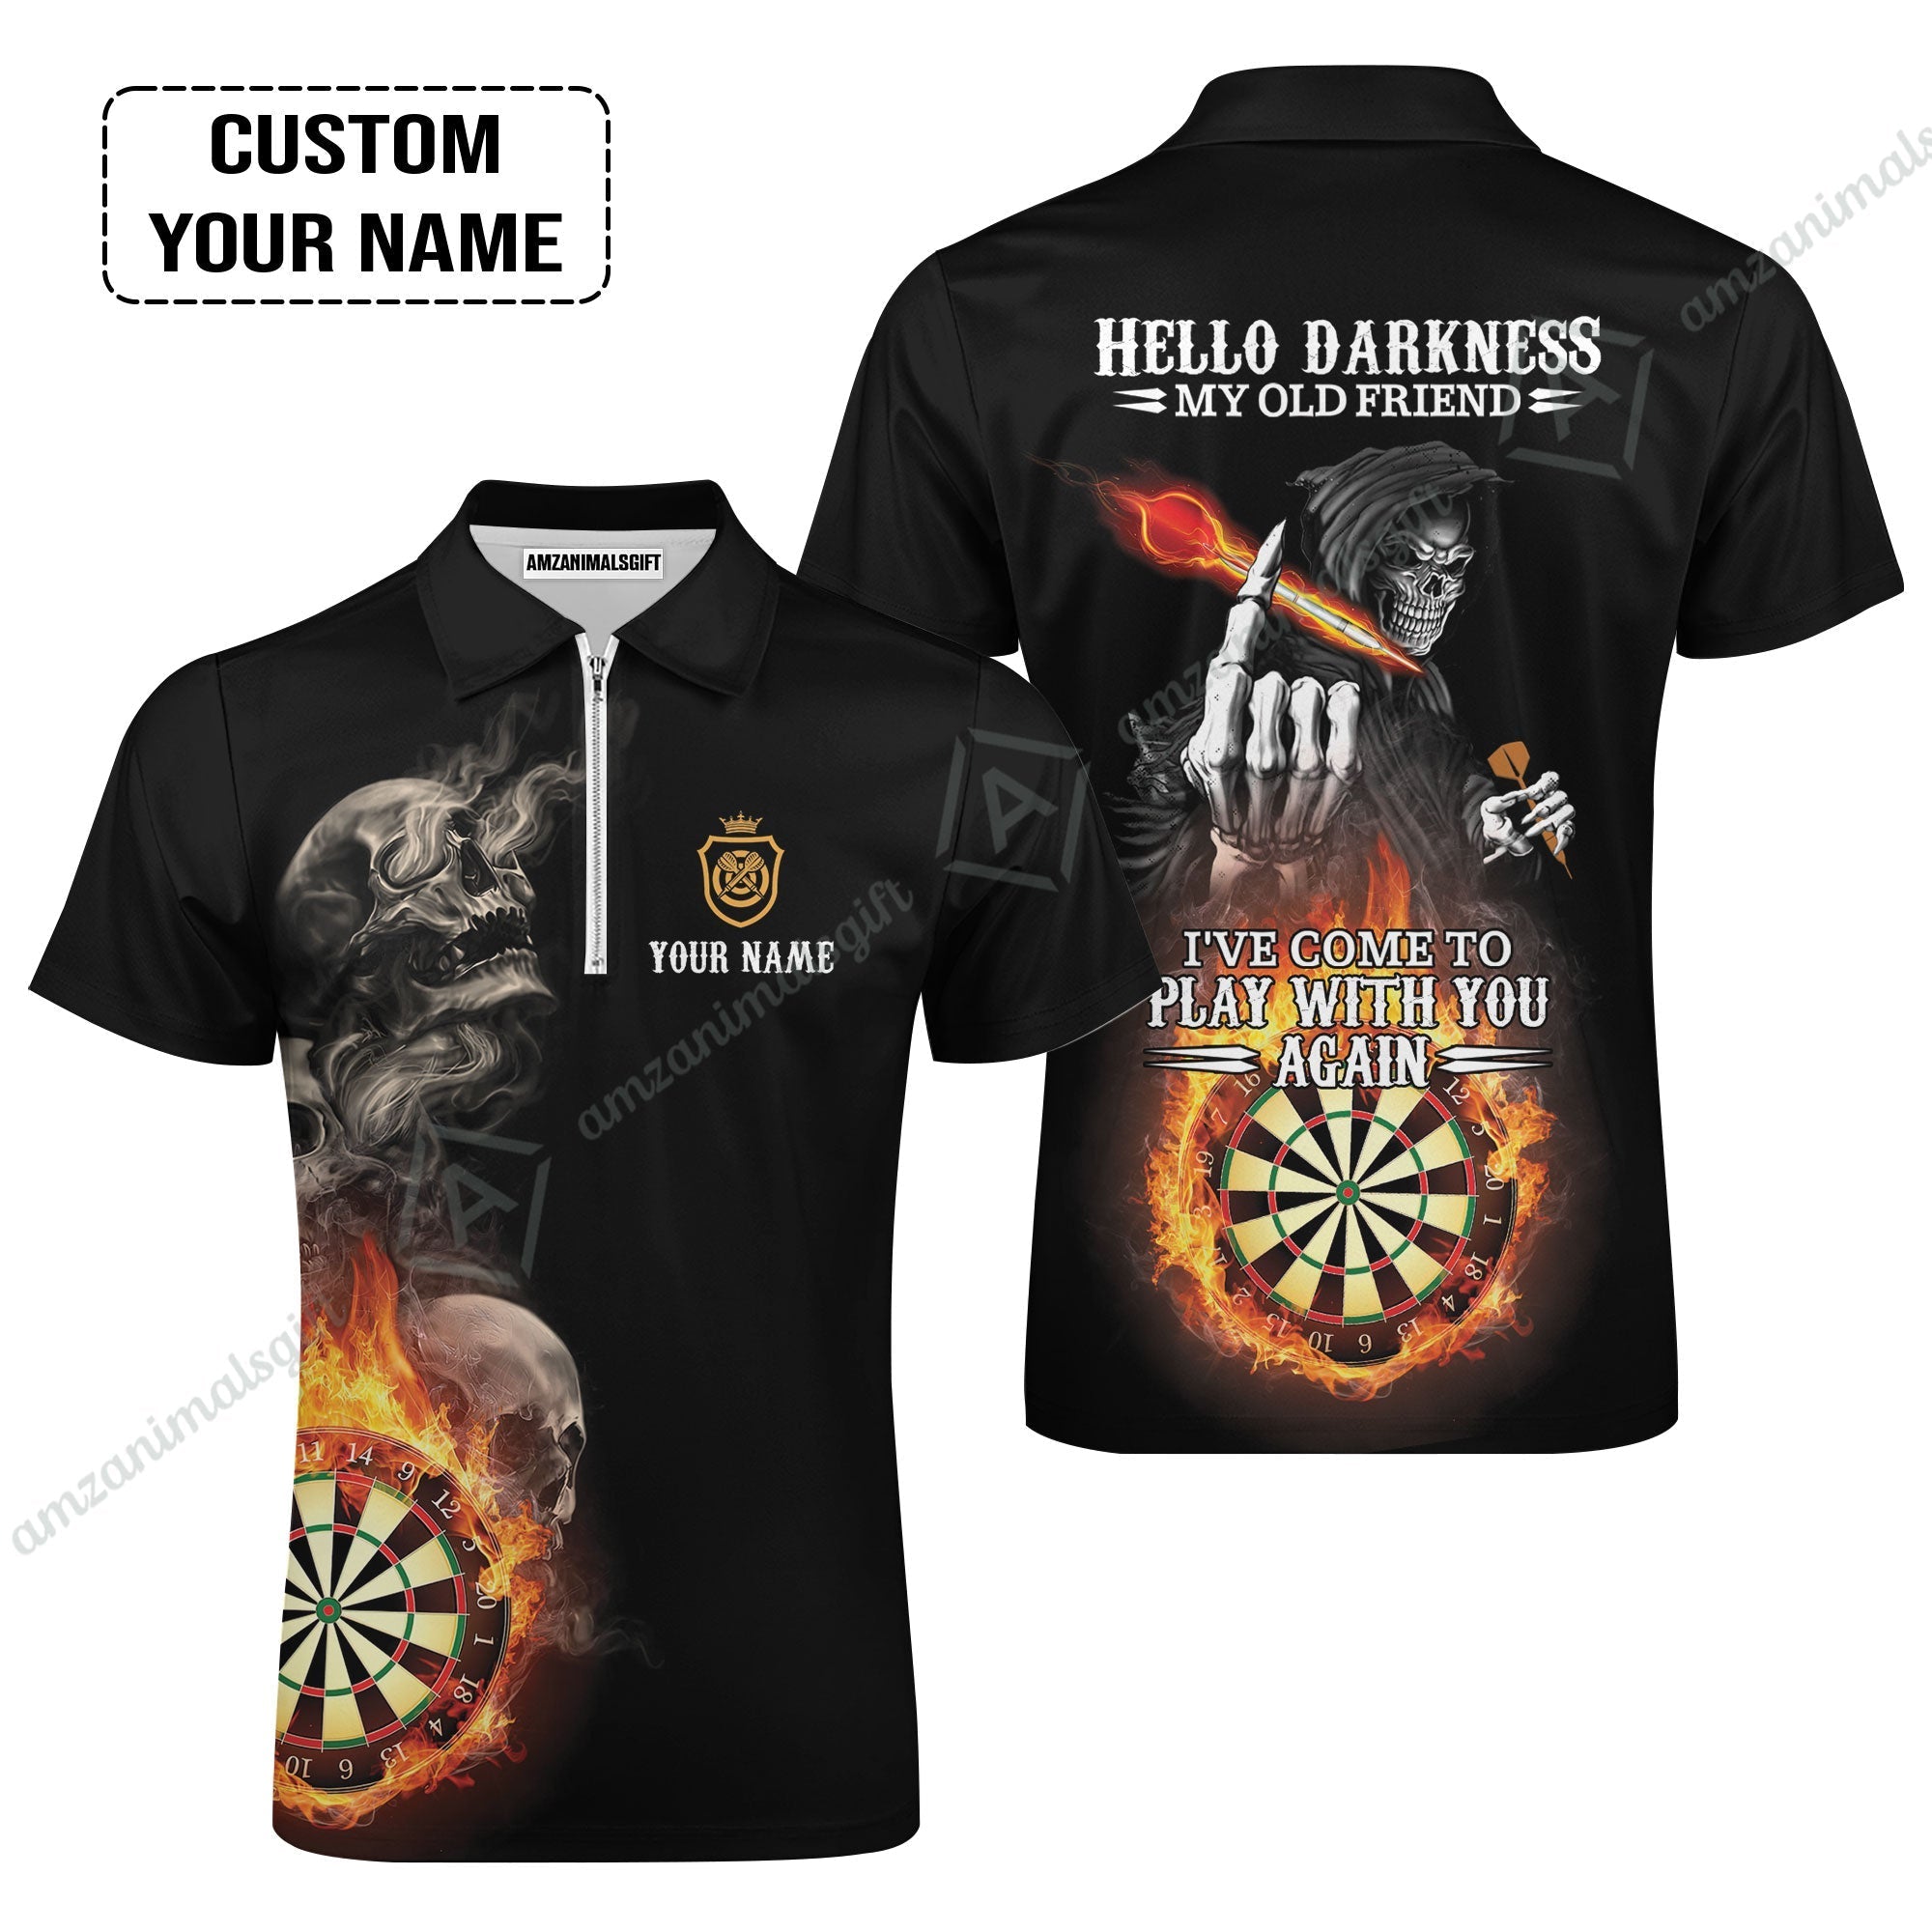 Darts Custom Name Zip Polo Shirt, Skull Personalized Zip Polo Shirt, Hello Darkness My Old Friend I've Come To Play With You Again